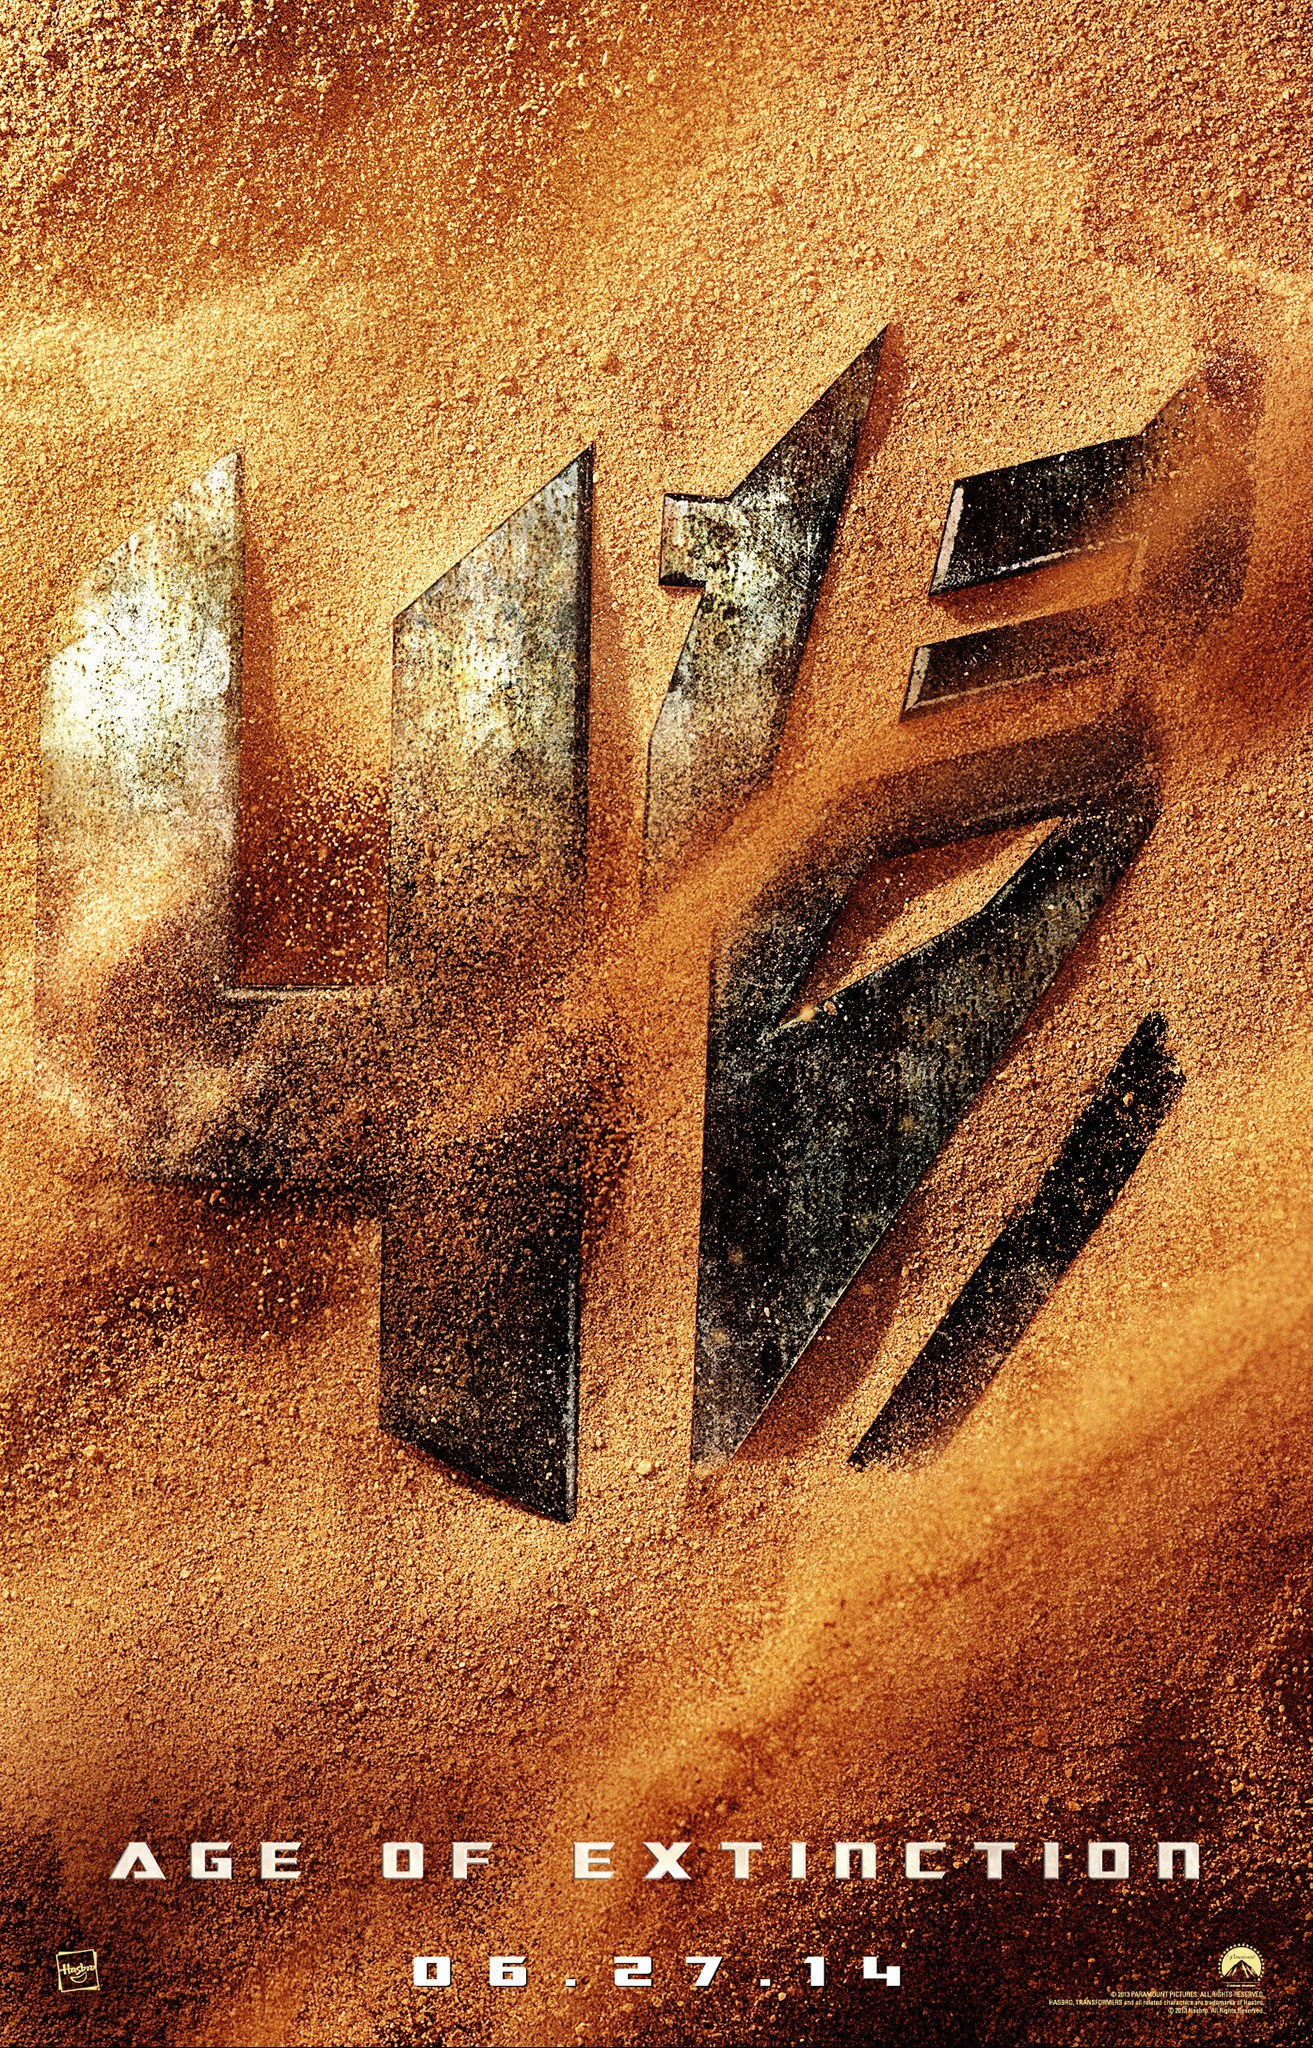 Transformers:-Age-of-Extinction-Teaser-Poster